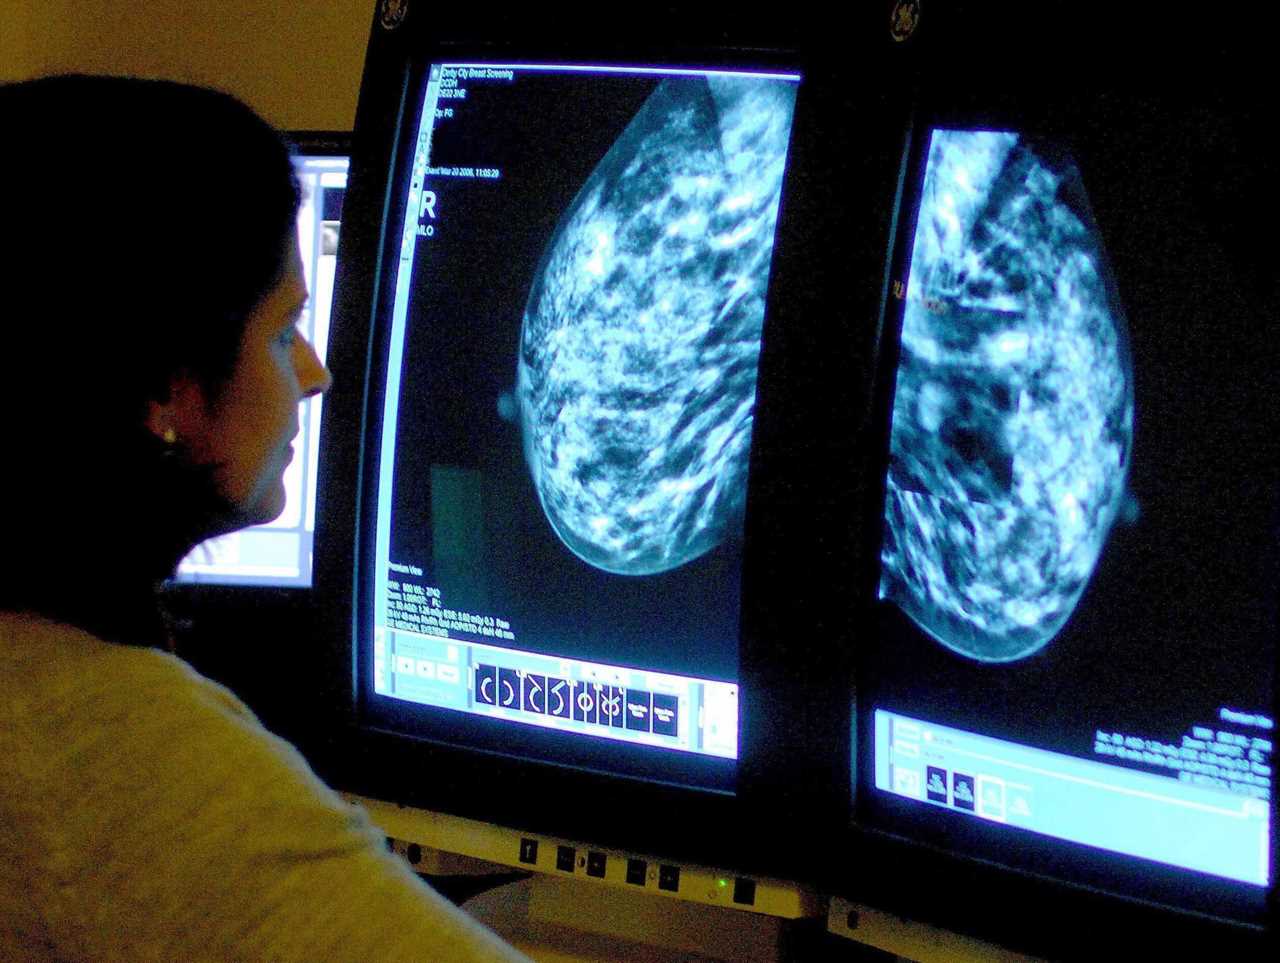 Thousands of women with breast cancer could benefit from new NHS-approved pill